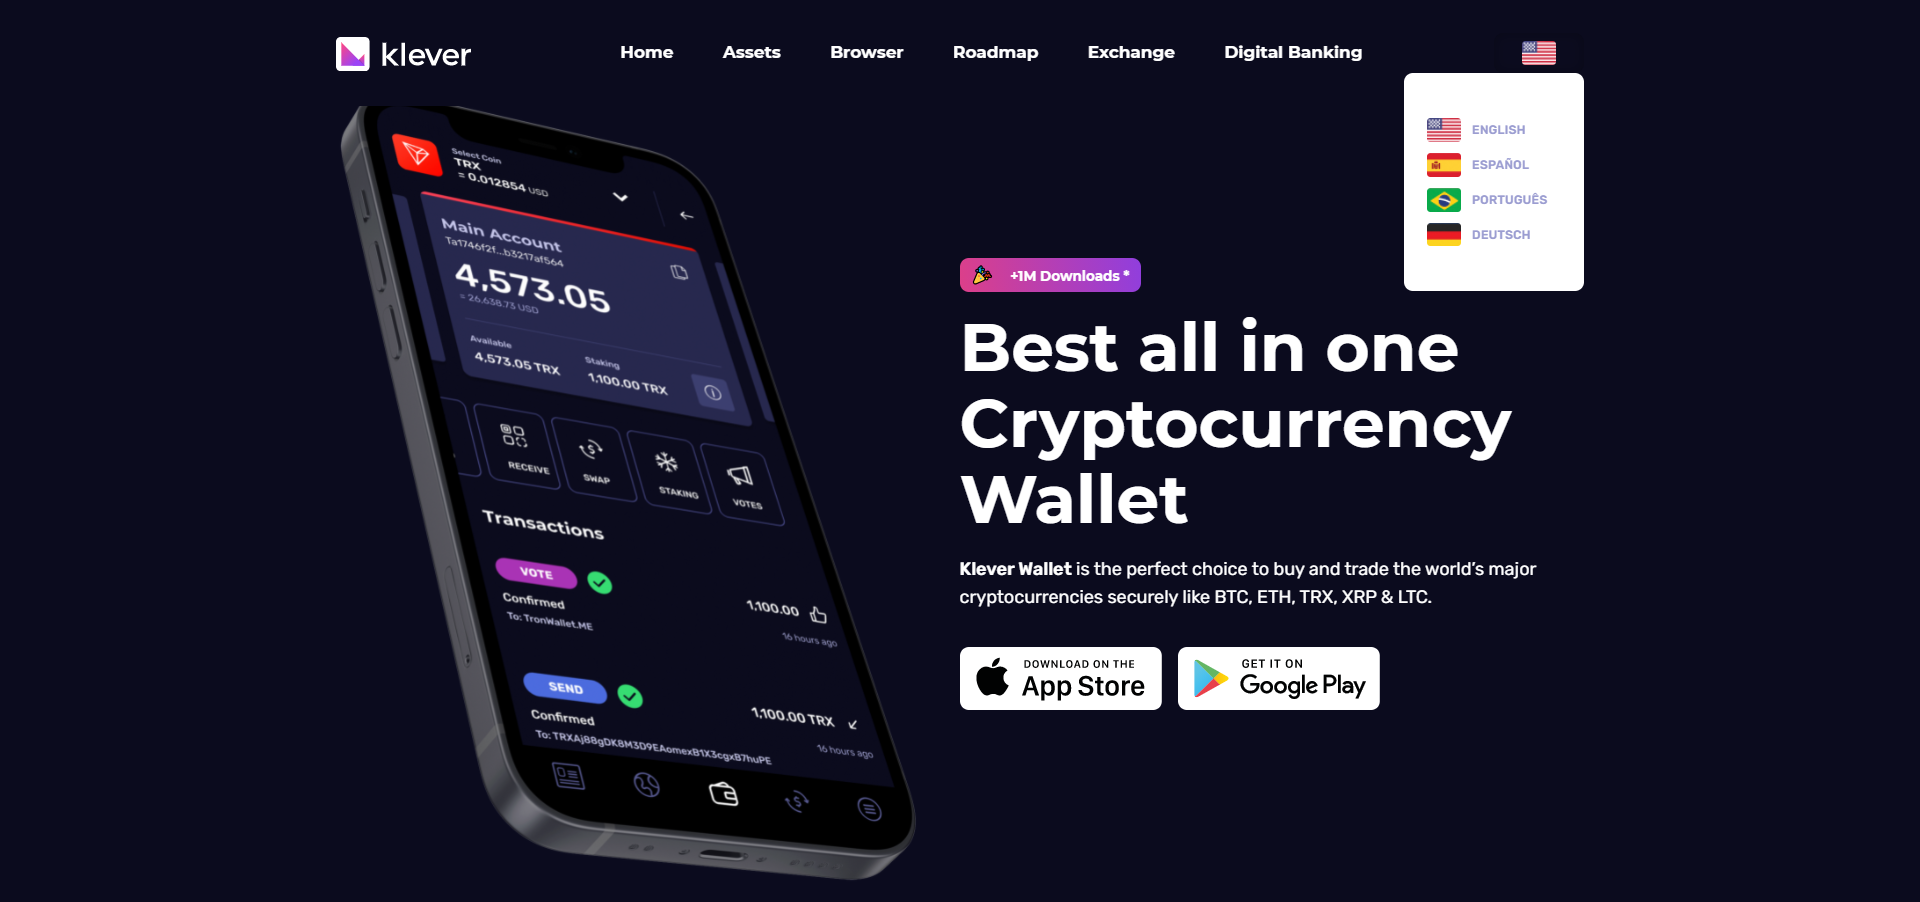 Klever app launches its own exchange